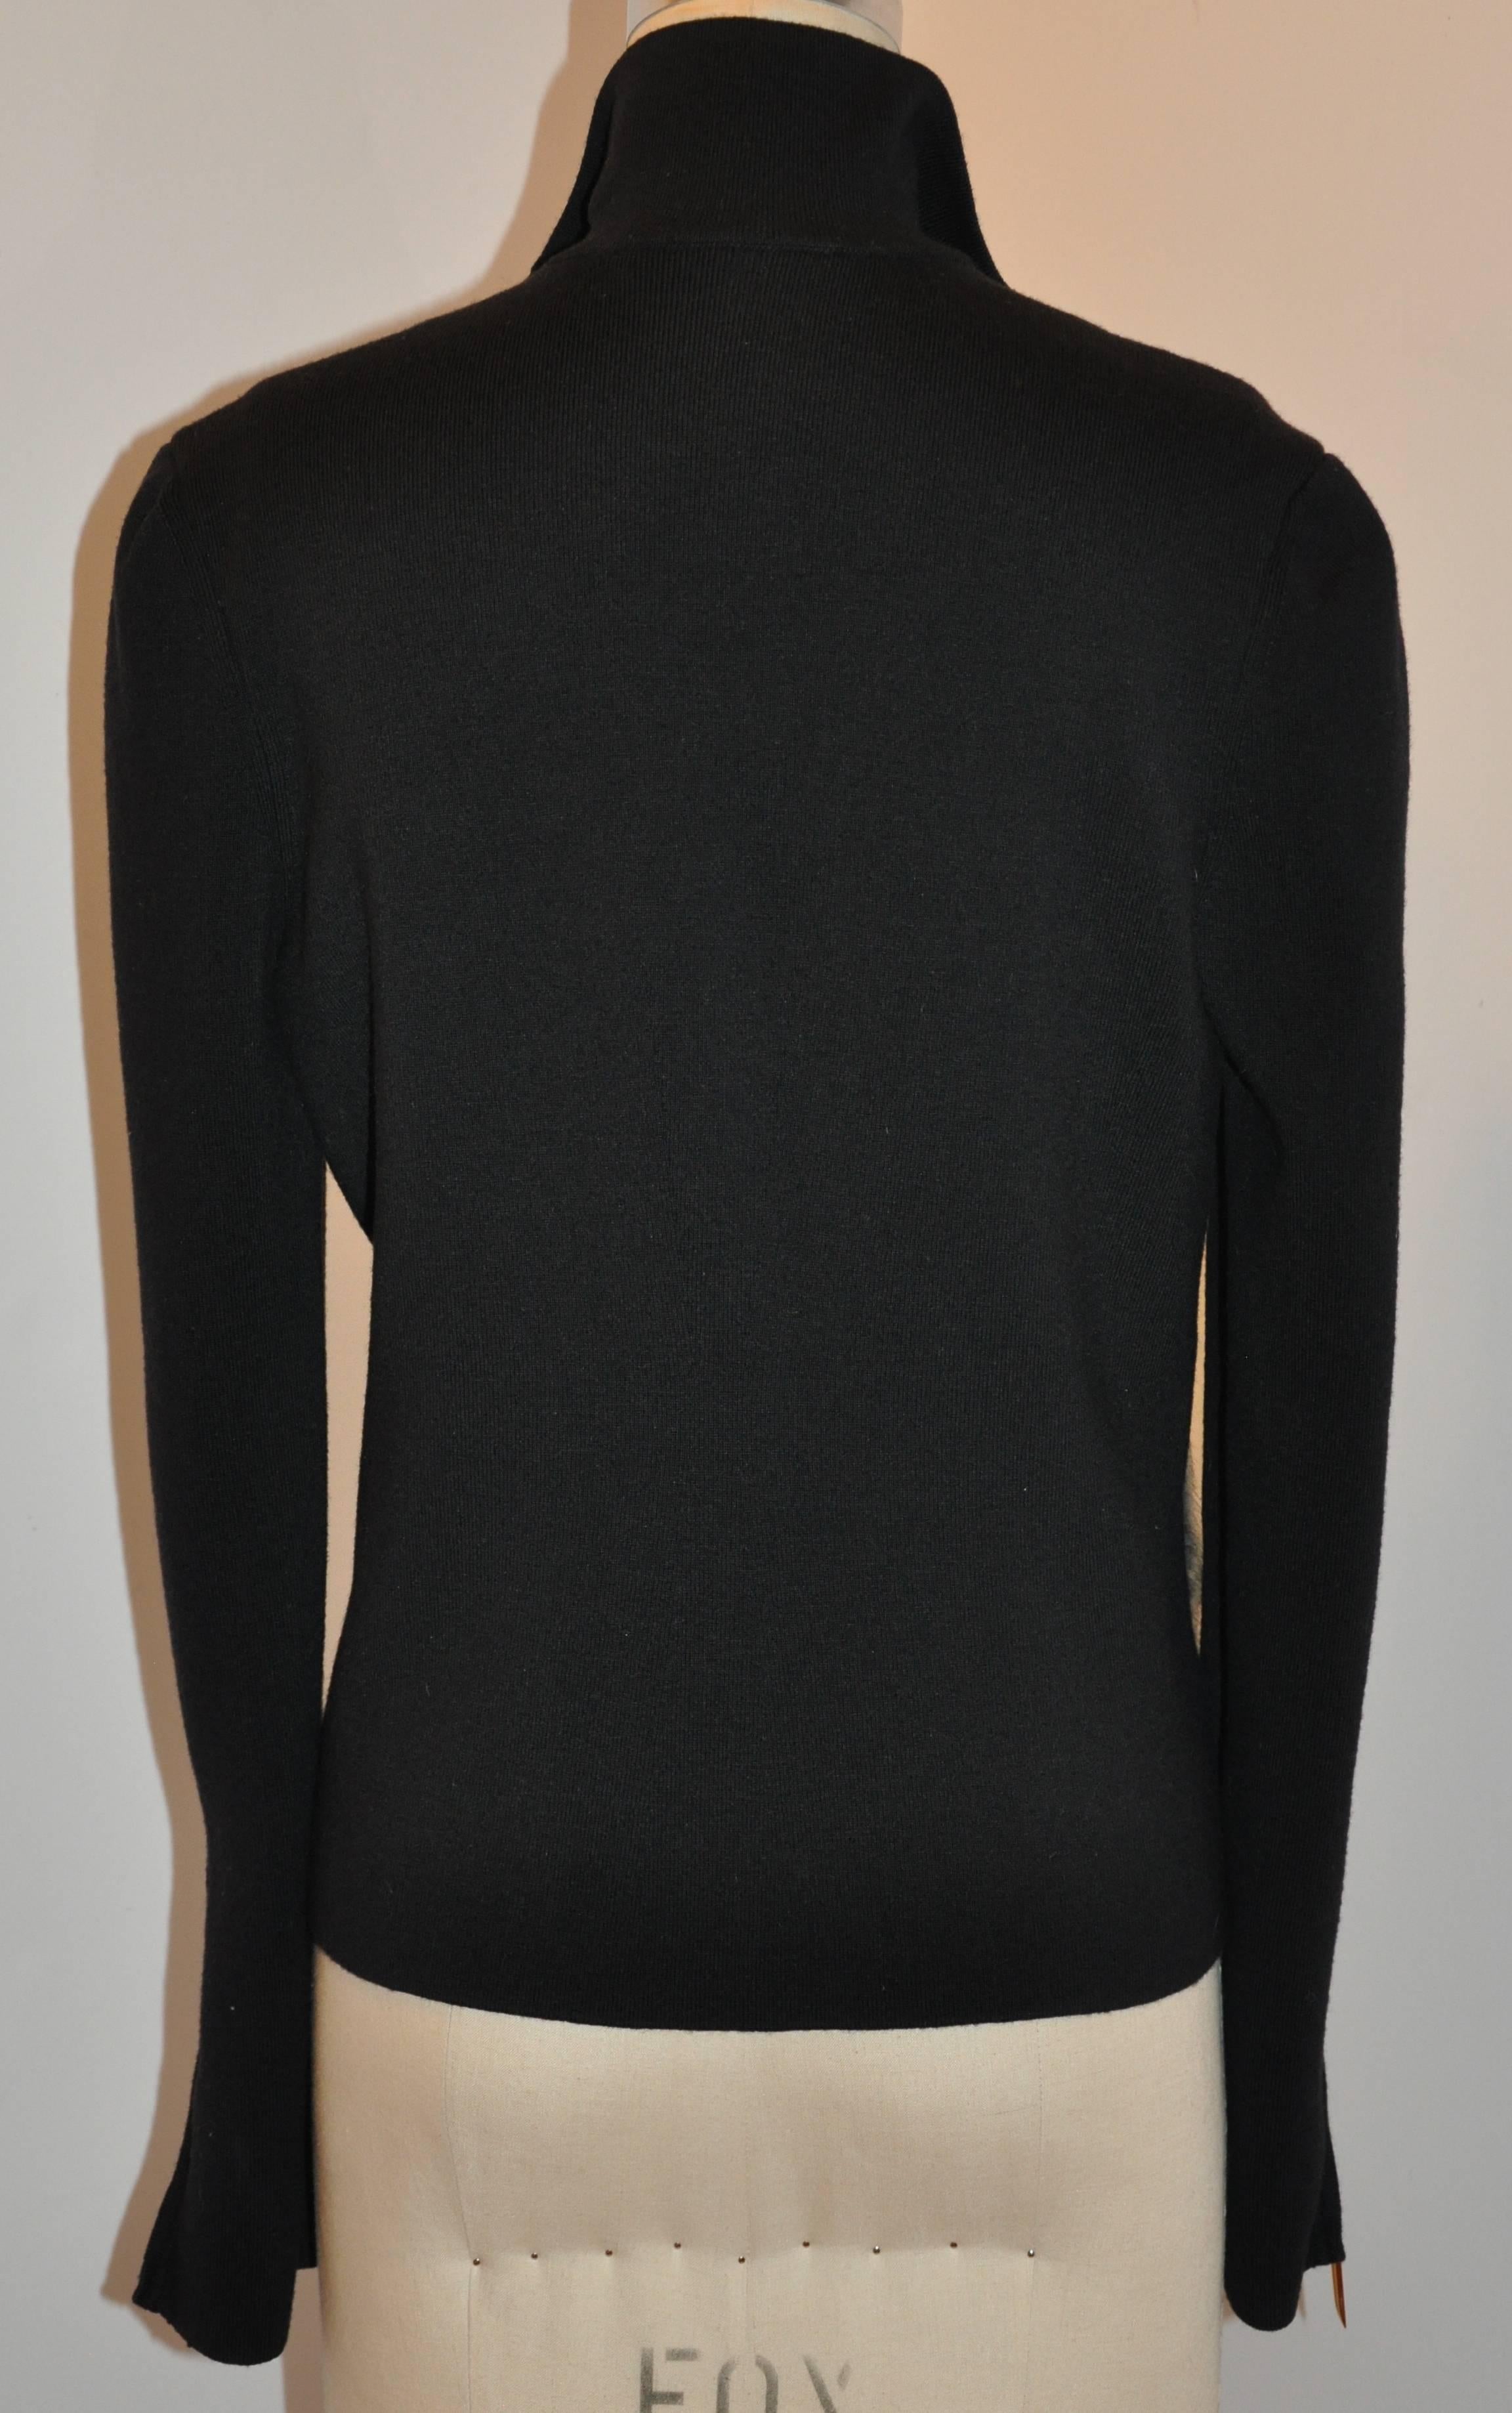        Gucci's wonderfully timeless and simply elegant black stretch zipper jacket of 70% merino wool, 20% silk and 10% cashmere, accented in front with Amster fur. The high collar measures 3 1/4" in height. The front, as well as both sleeve's